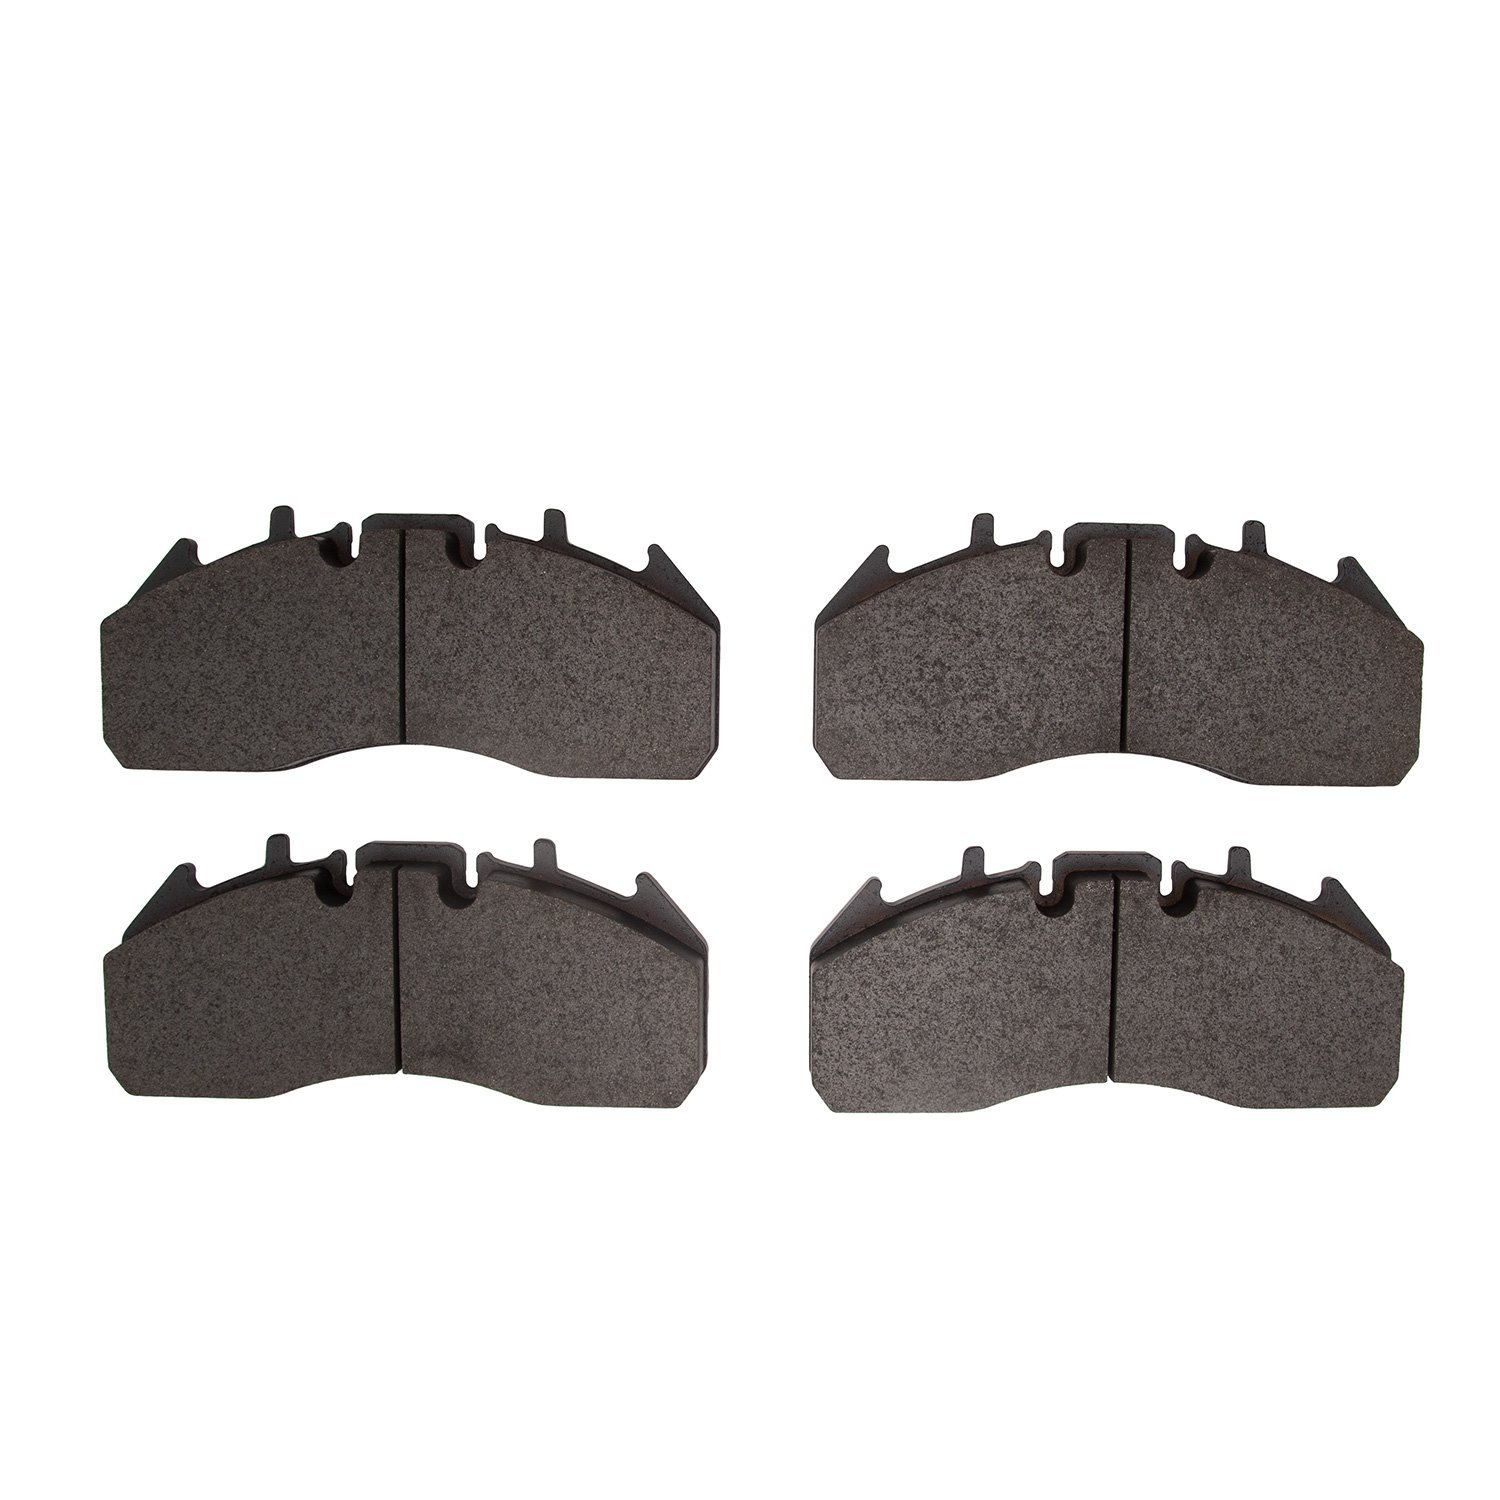 Super-Duty Brake Pads, 2005-2016 Volvo, Position: Front & Rear